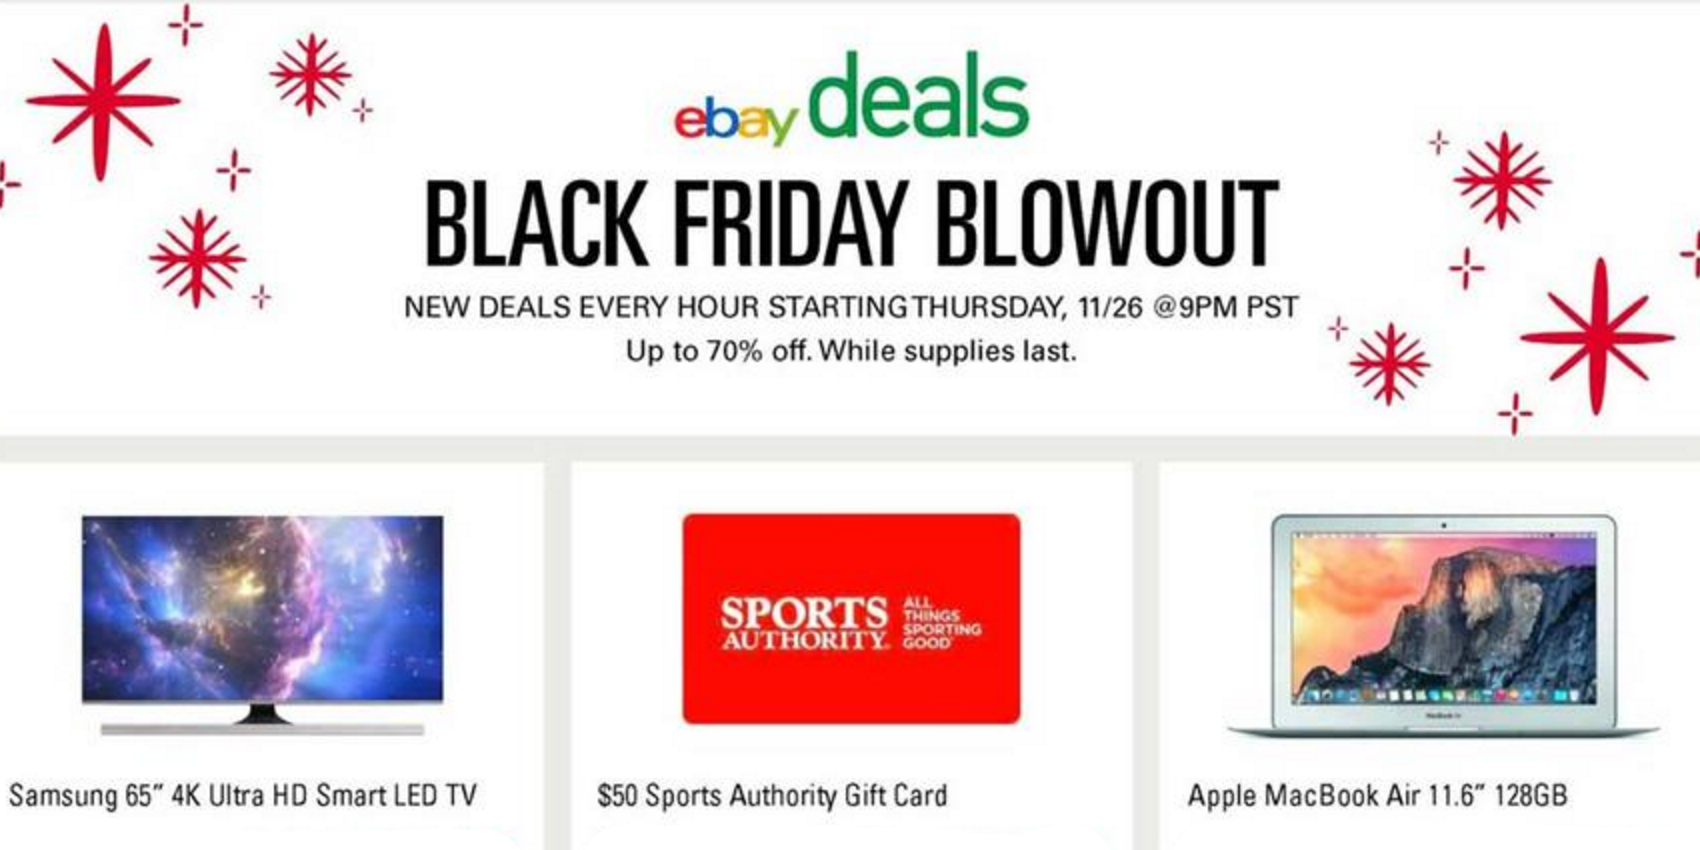 eBay's Black Friday and Cyber Monday will deliver deals on MacBooks